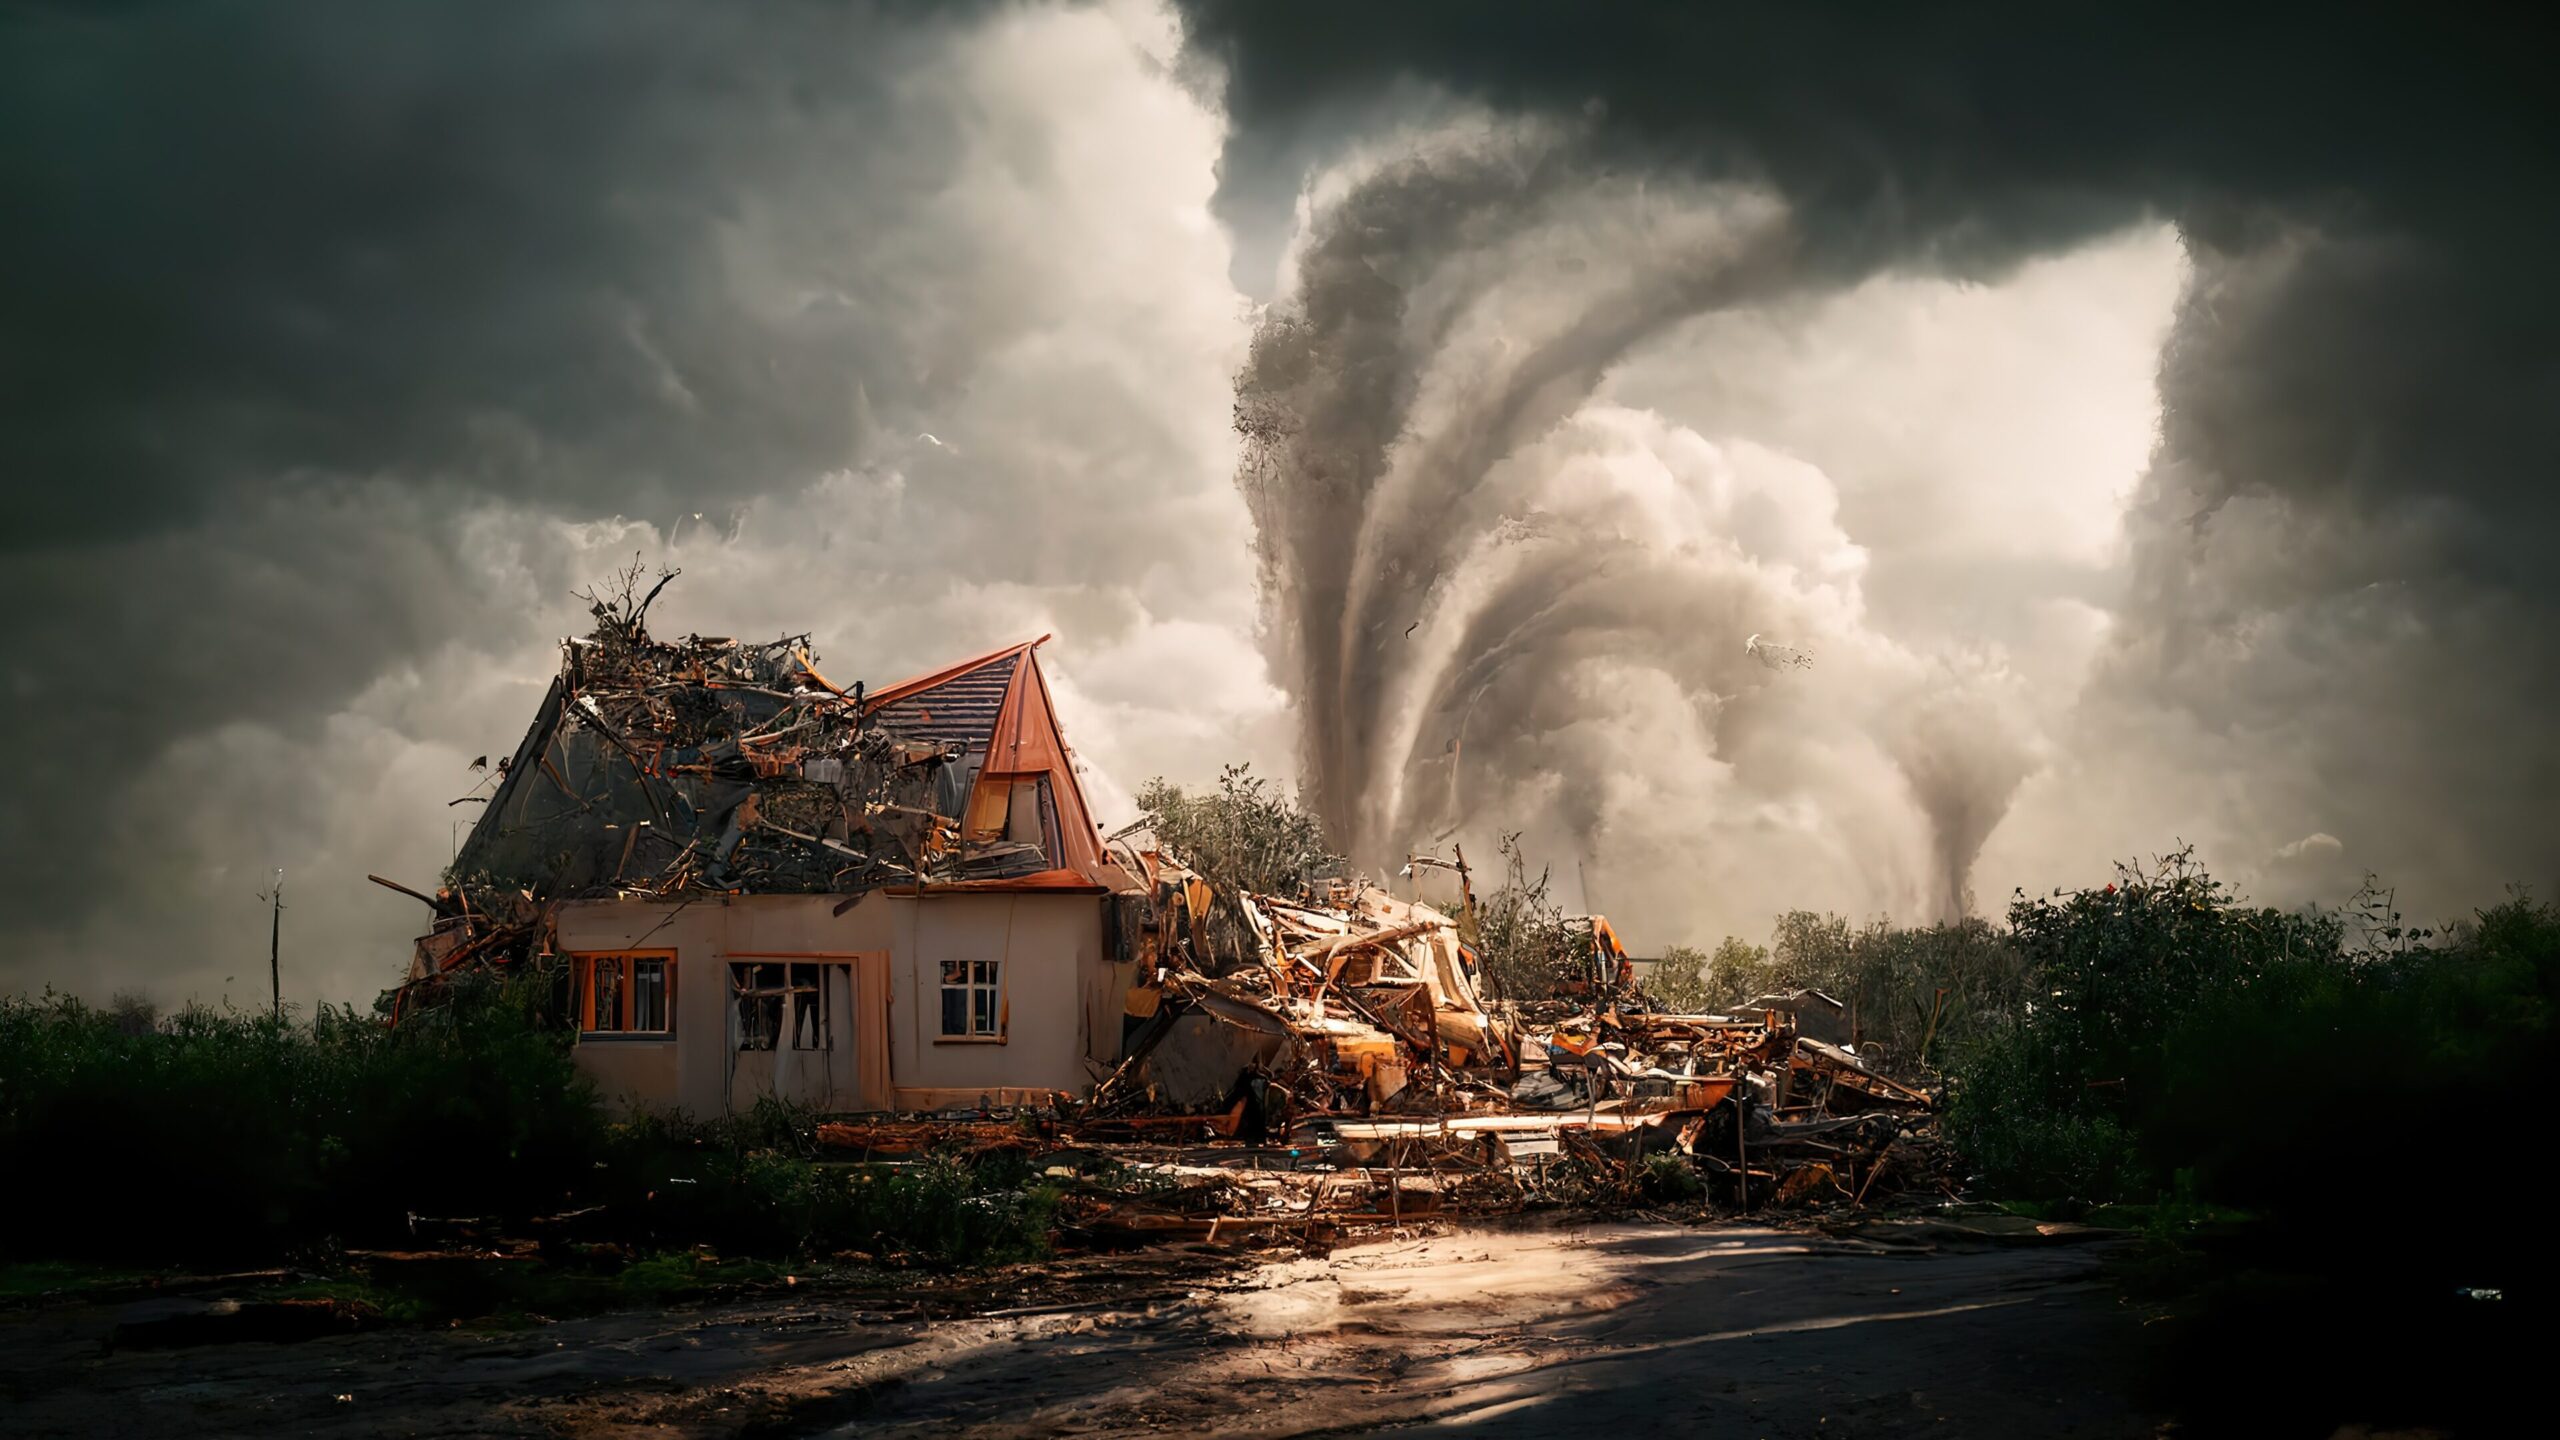 Destroyed house from natural disaster, tornado in the middle of a green field